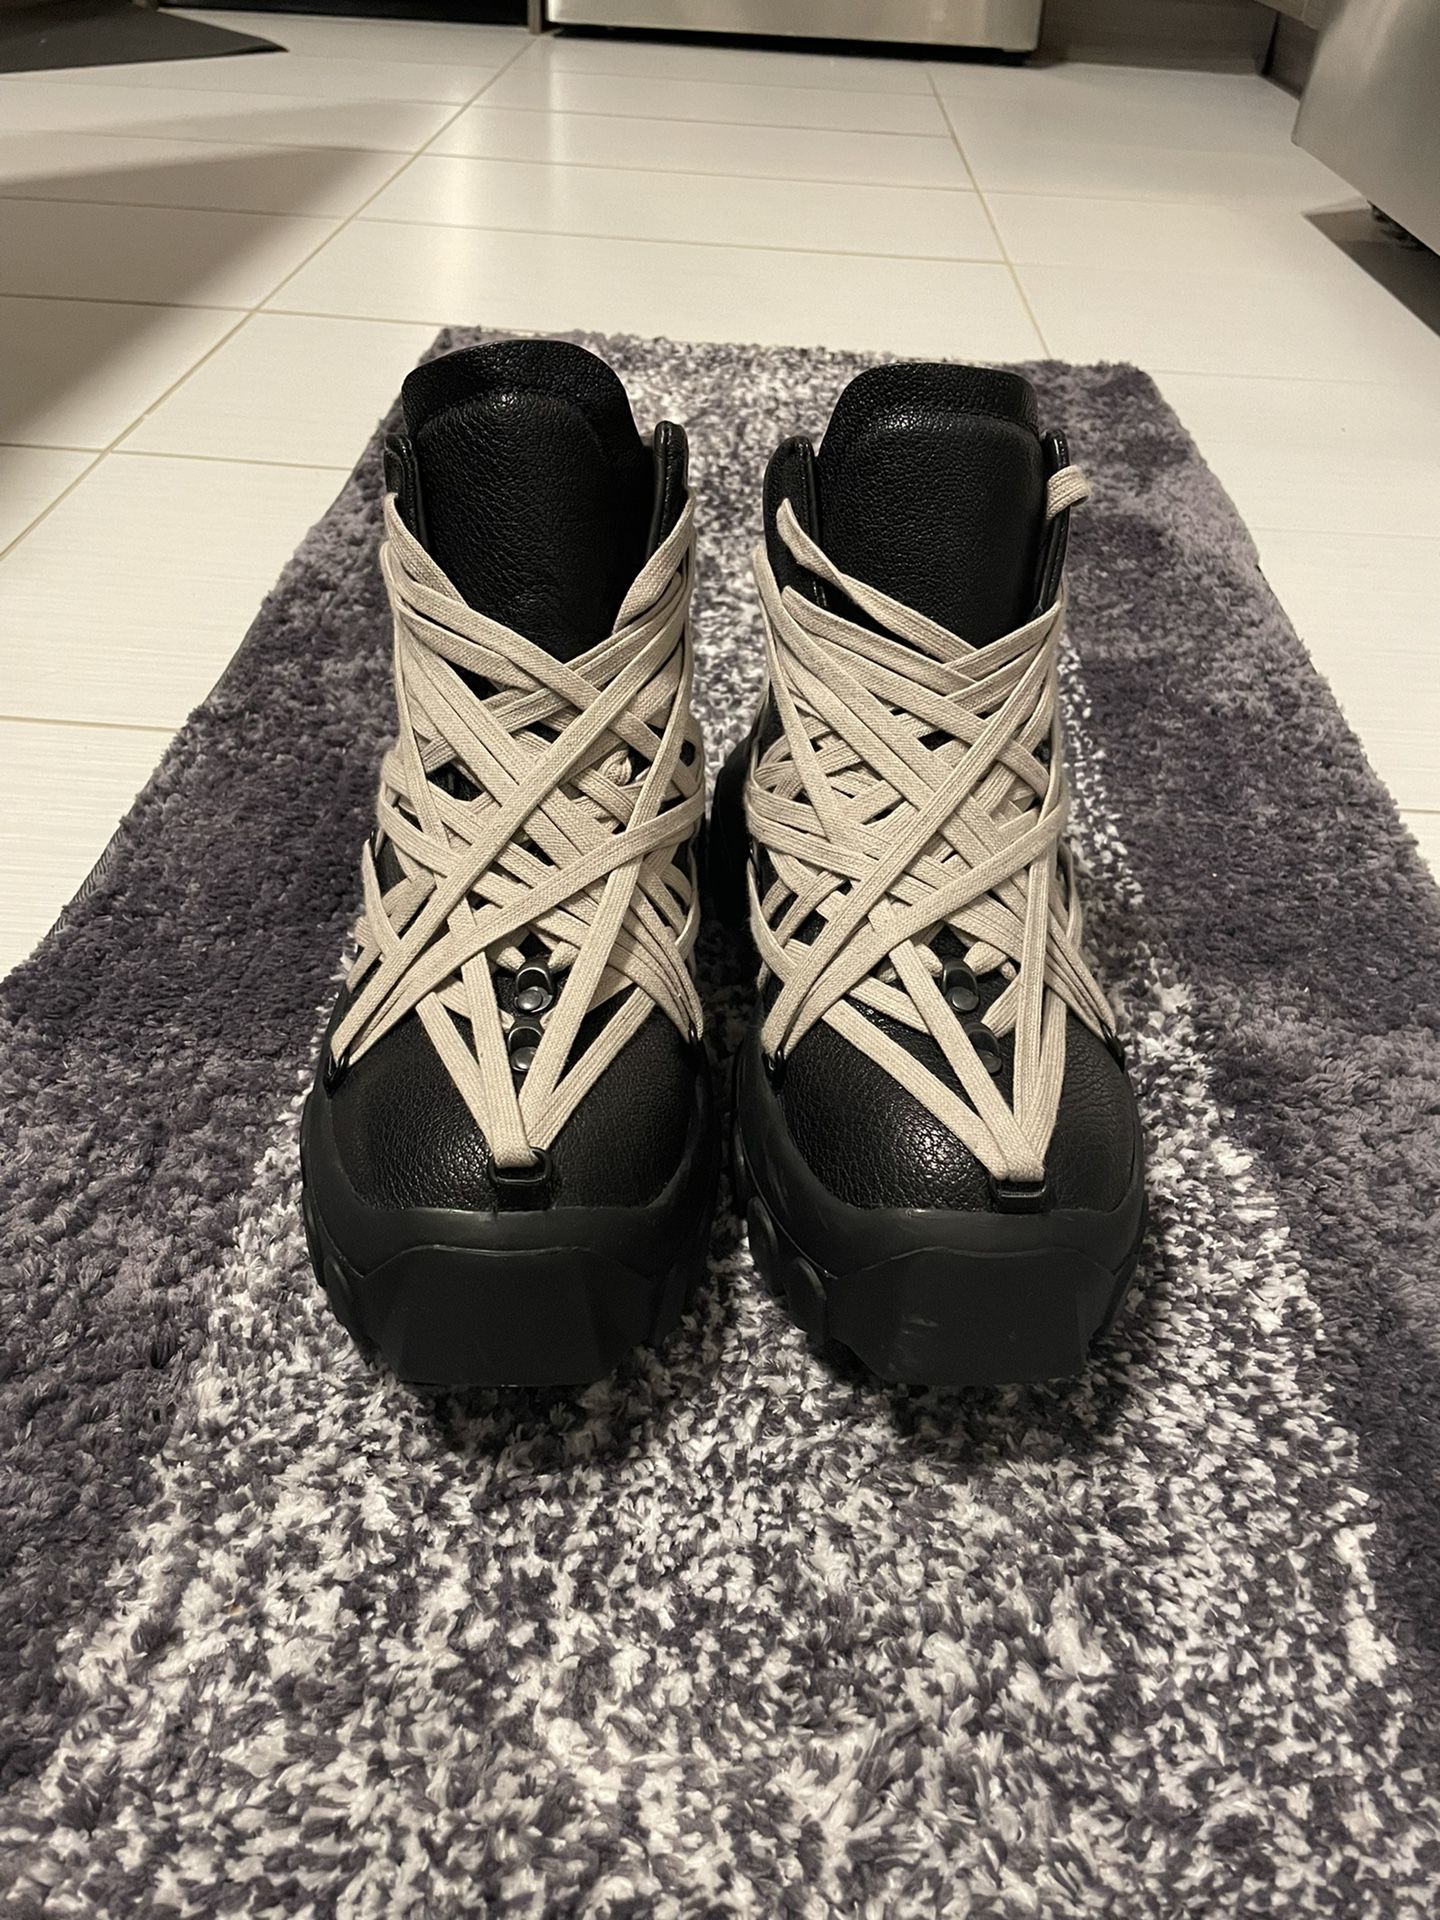 Rick Owens Megalace Tractor Boots for Sale in Boca Raton, FL - OfferUp